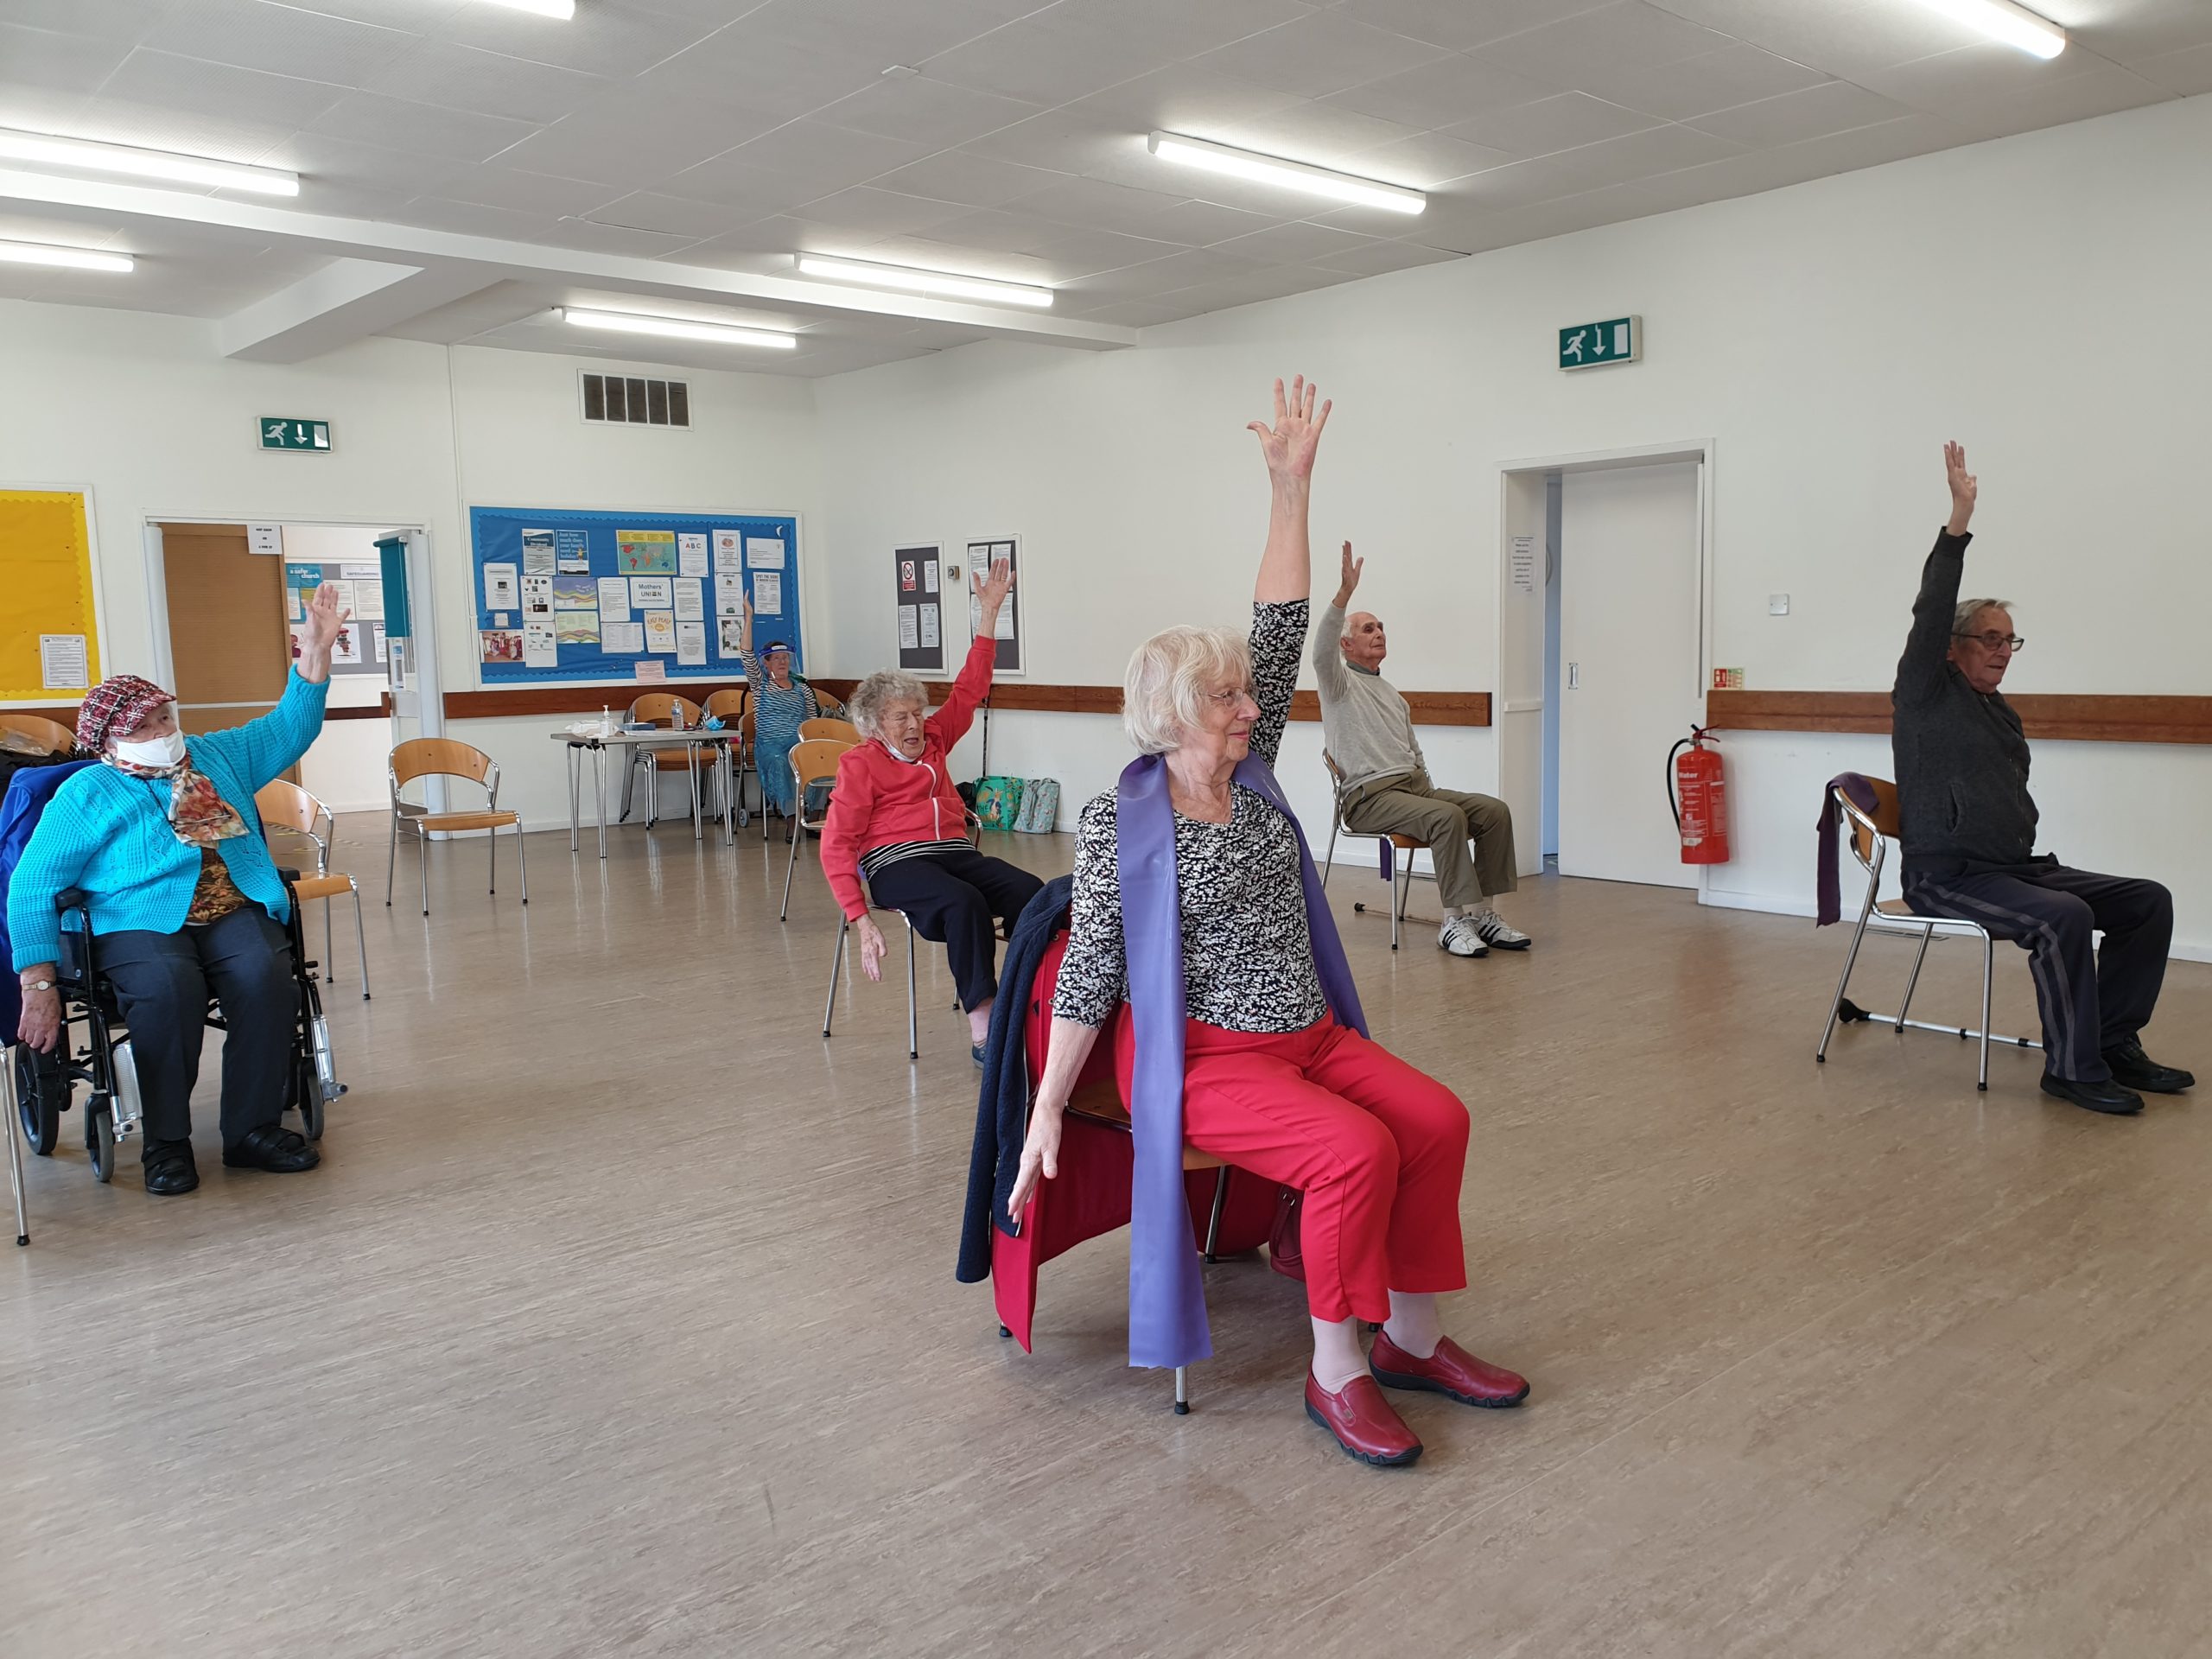 5 people take part in a better balance session, they sit on chairs and raise their arms towards the ceiling.